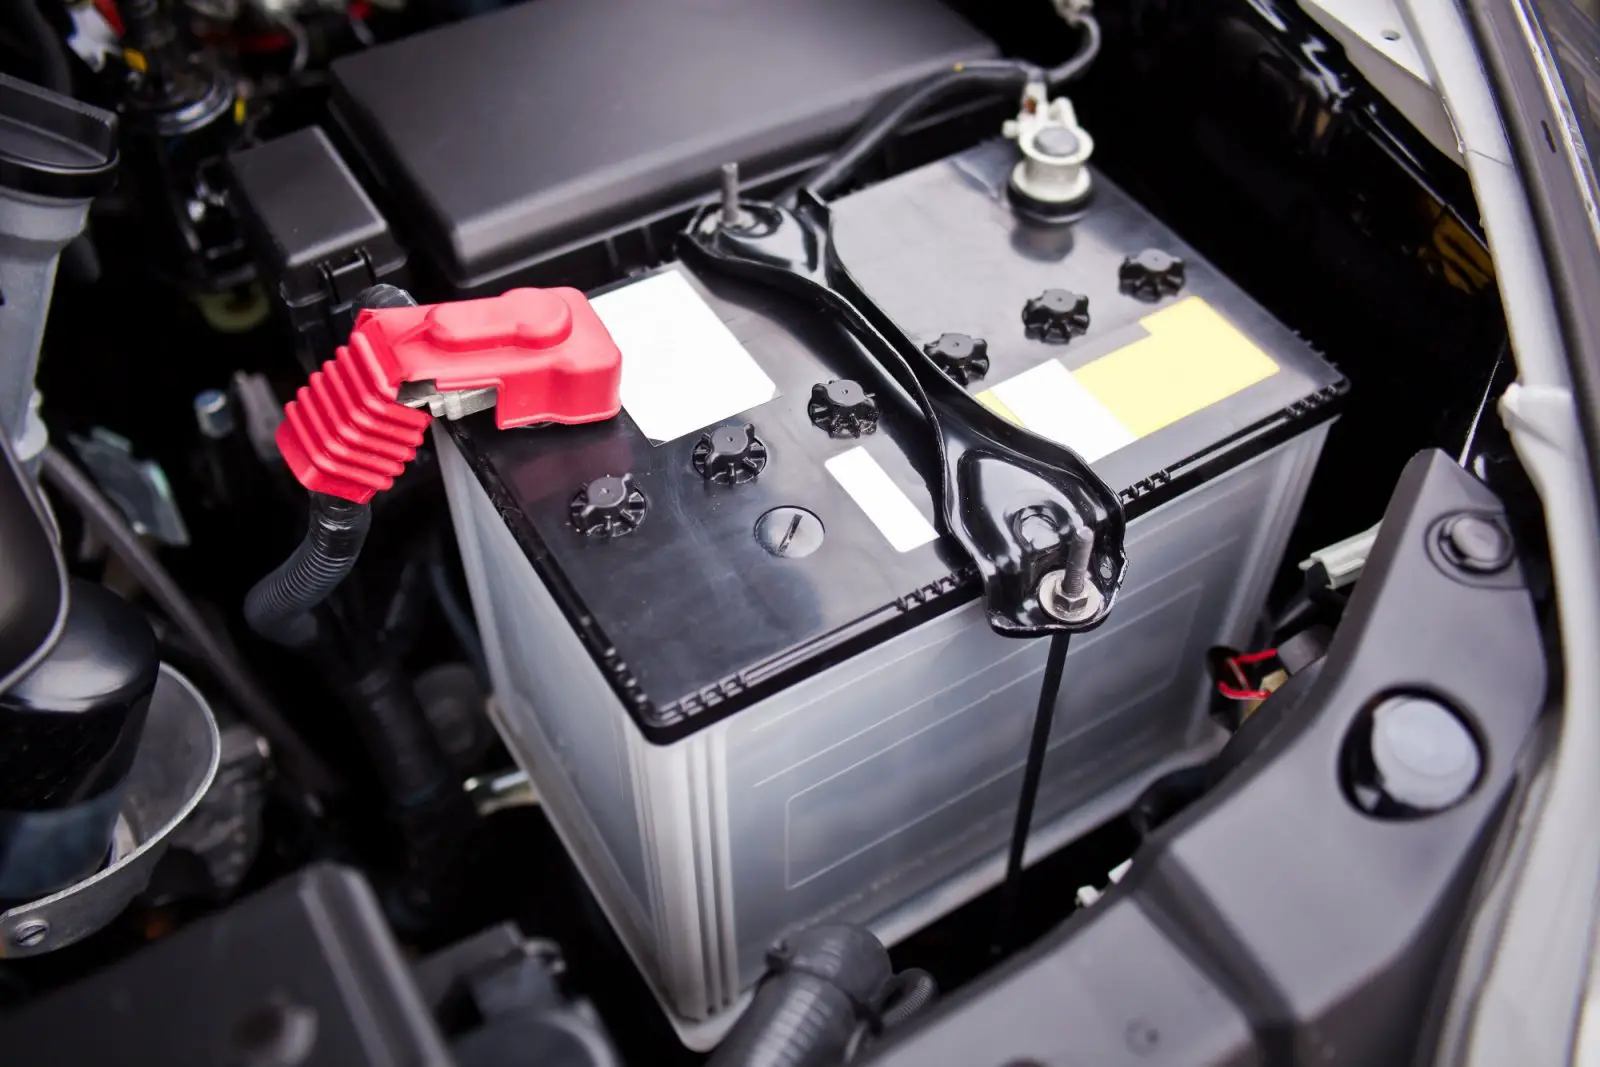 How Long Does a Car Battery Last on Average? Car battery life